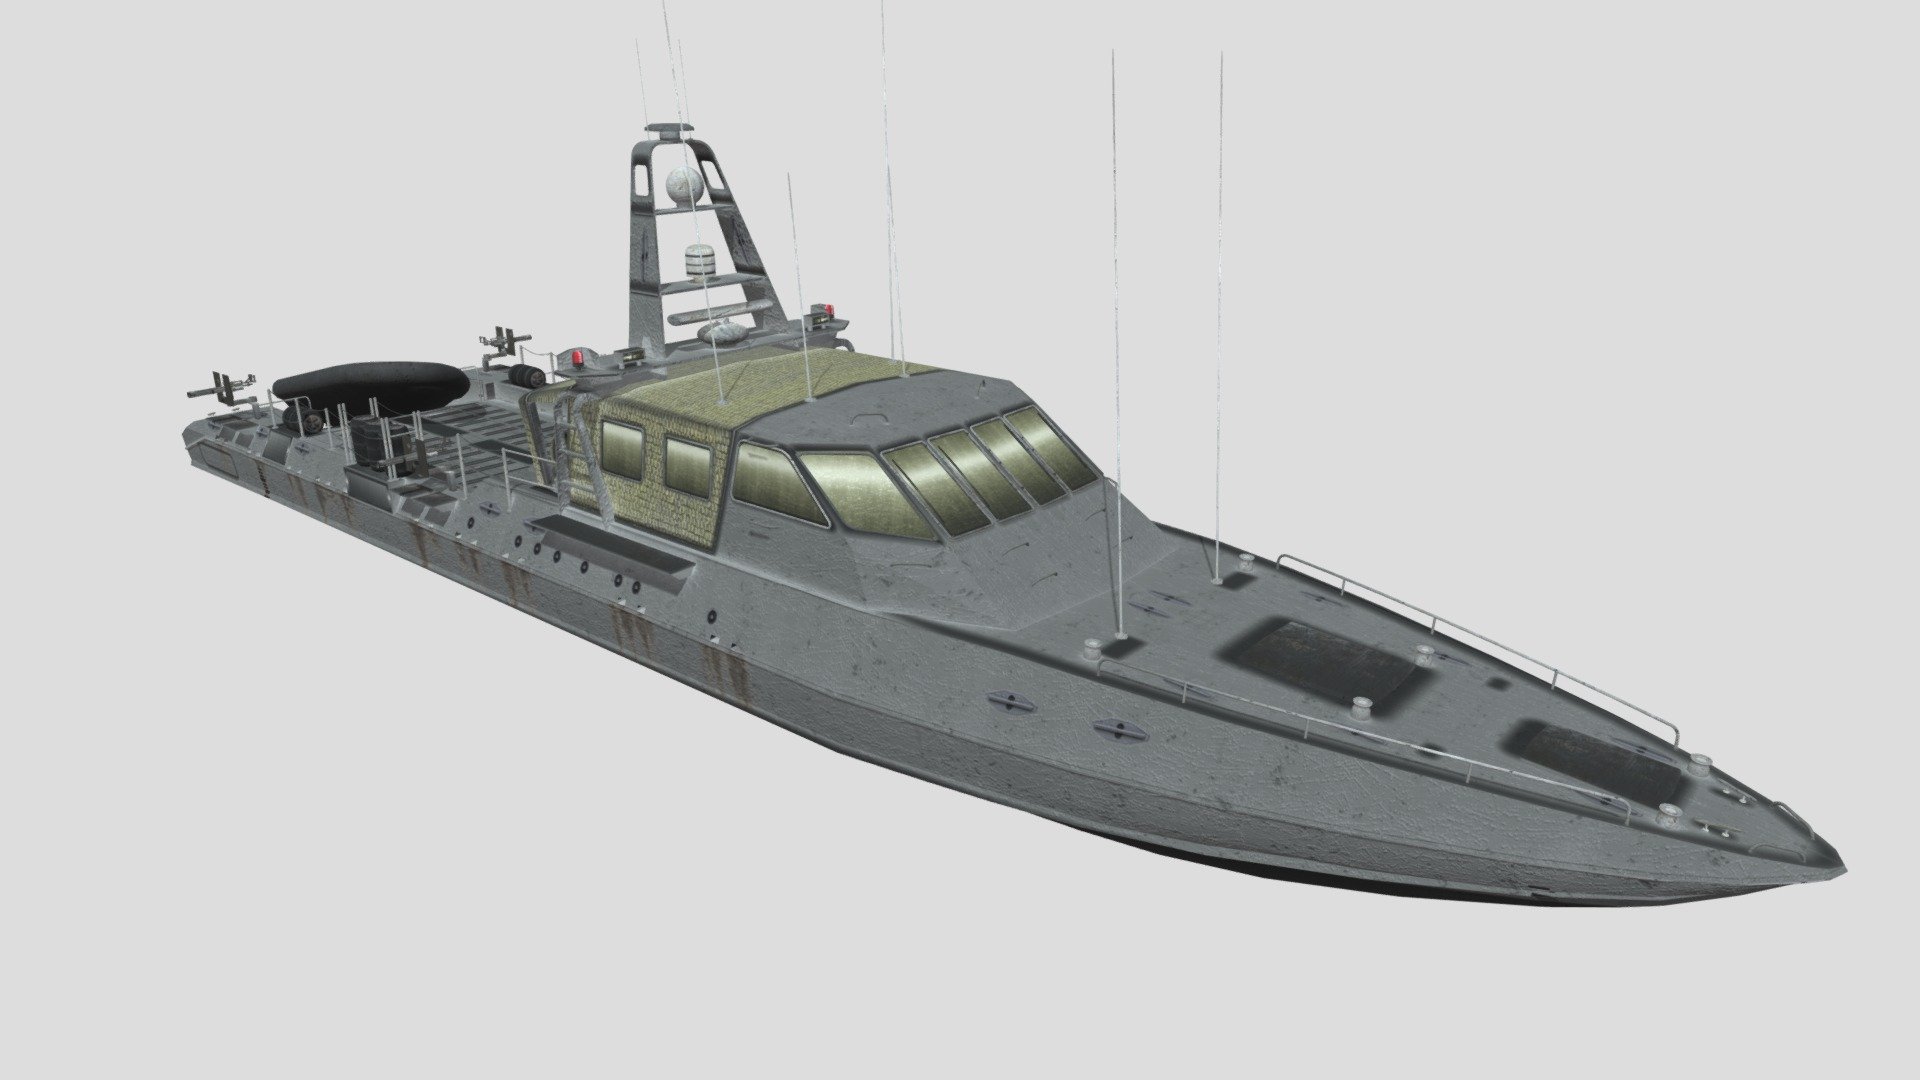 This model includes UVW Mapping using 2 textures (one boat, one detail) in 4K resolution. In addition there are 3 paint schemes for the boat which you can pick as desired (Grey, Grey Digi Camo, and Blue Digi Camo). The model contains many tris, but now with many more quads it is optimised and cleaned up for use in the gaming community. Natively built in C4D the model can be used in other formats that are provided to give a great effect.

The building UVW Map is included that allows you to draw your own textures if you desire.  Included formats with this model are:  FBX, 3DS, Blender, C4D, DAE, and OBJ 3d model